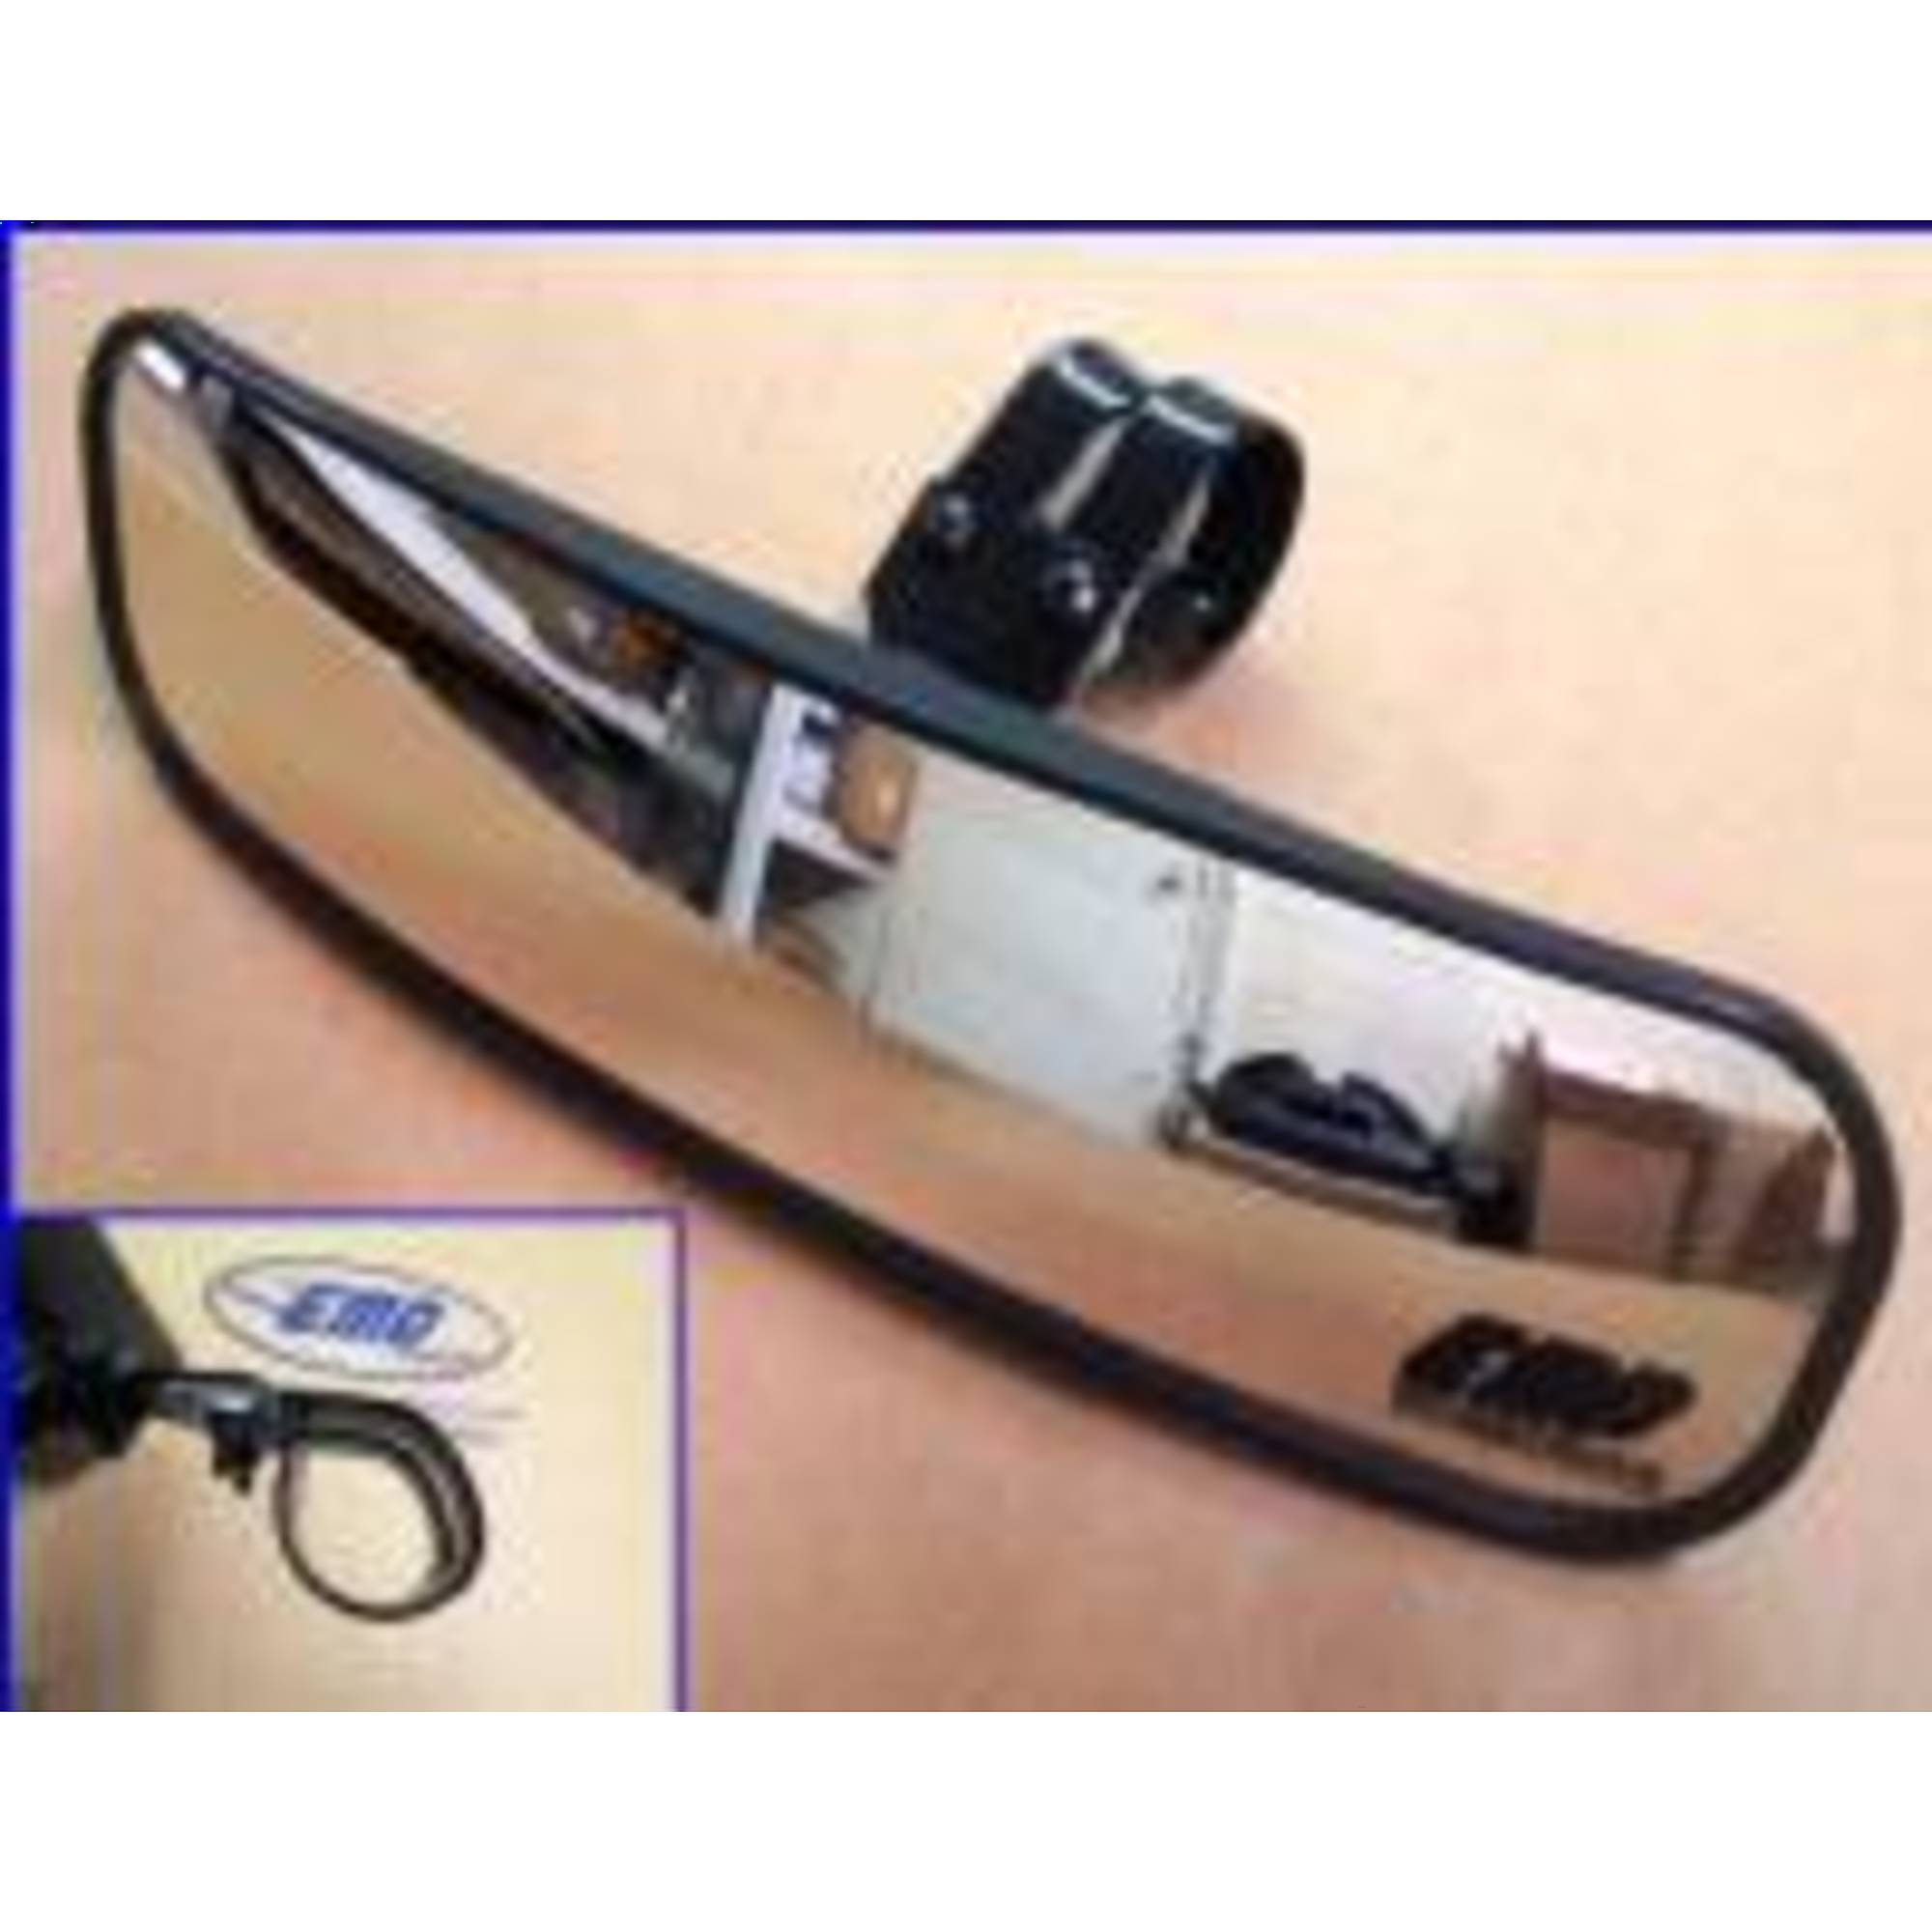 Extreme Metal Products, Panoramic Rear Mirror (1-1/2Inch) - (1-5/8Inch), Model 12533-1.5-1.625 inch